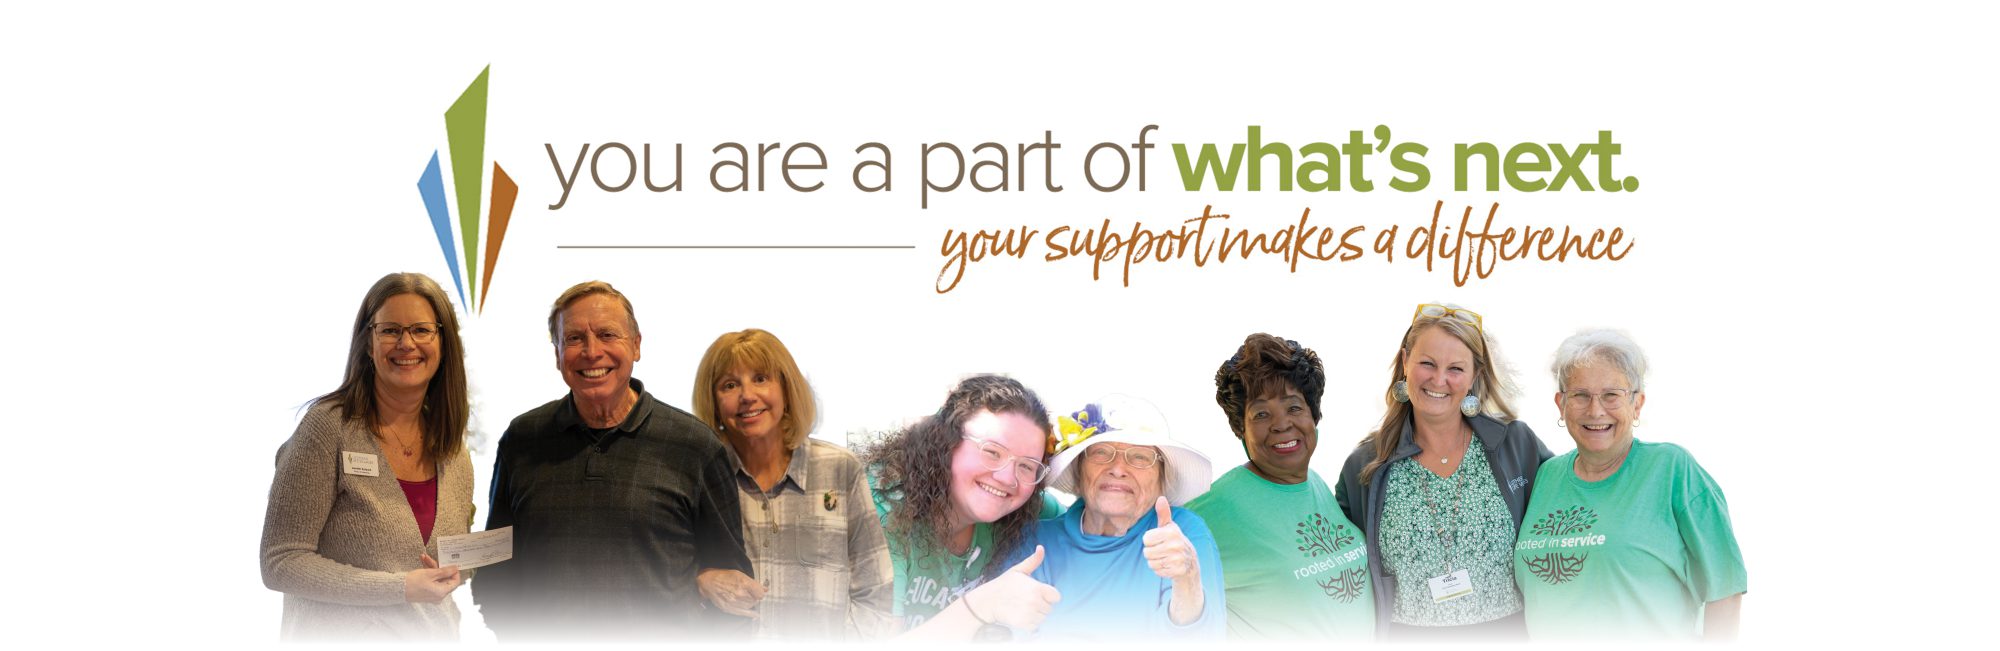 You are a part of what's next. Your support makes a difference